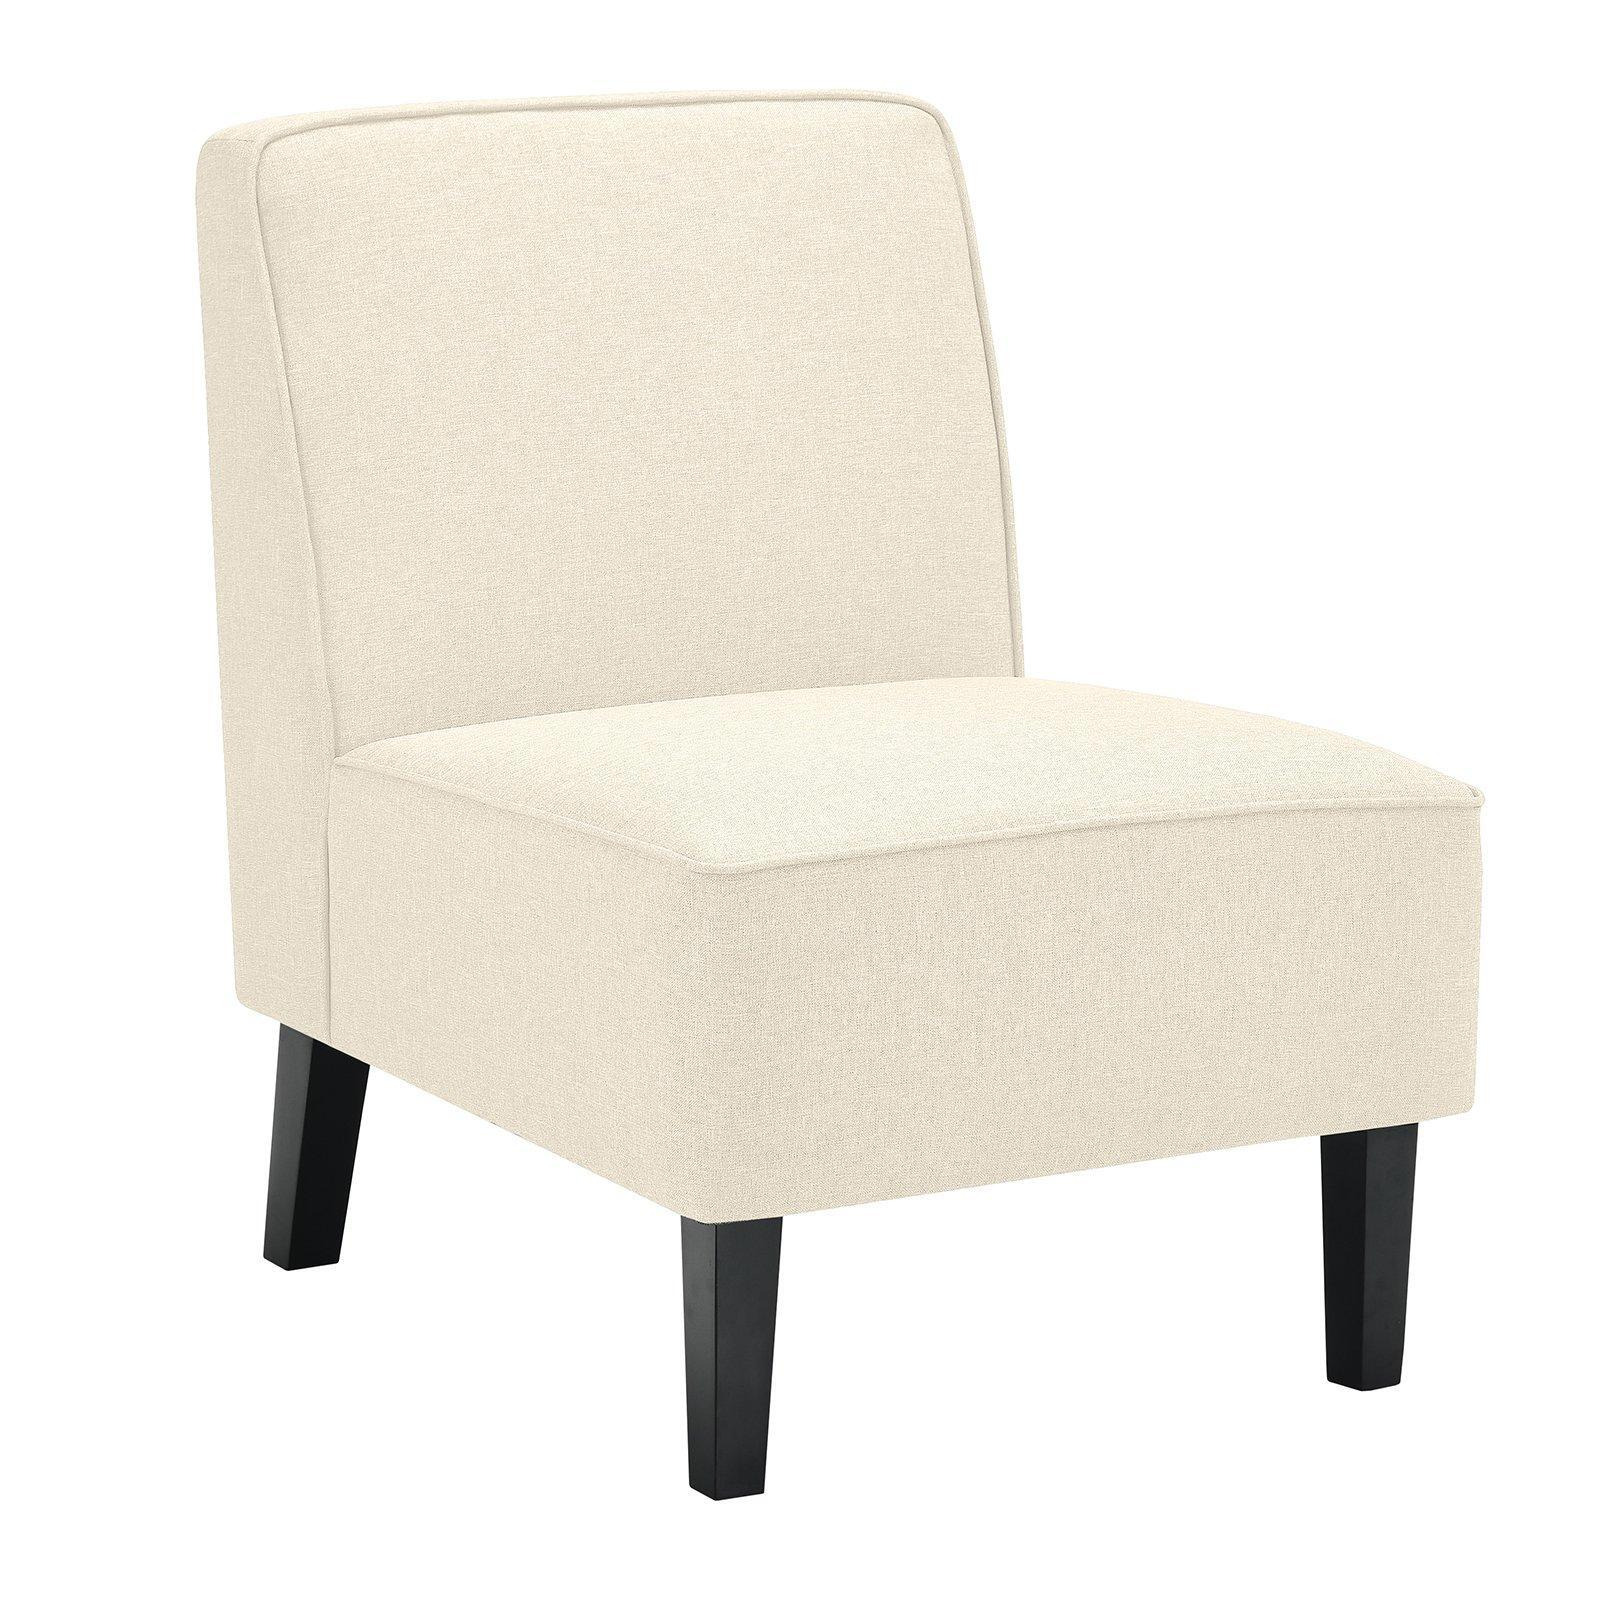 Upholstered Leisure Chair Accent Chair Linen Fabric Single Sofa Armless Chair - image 1